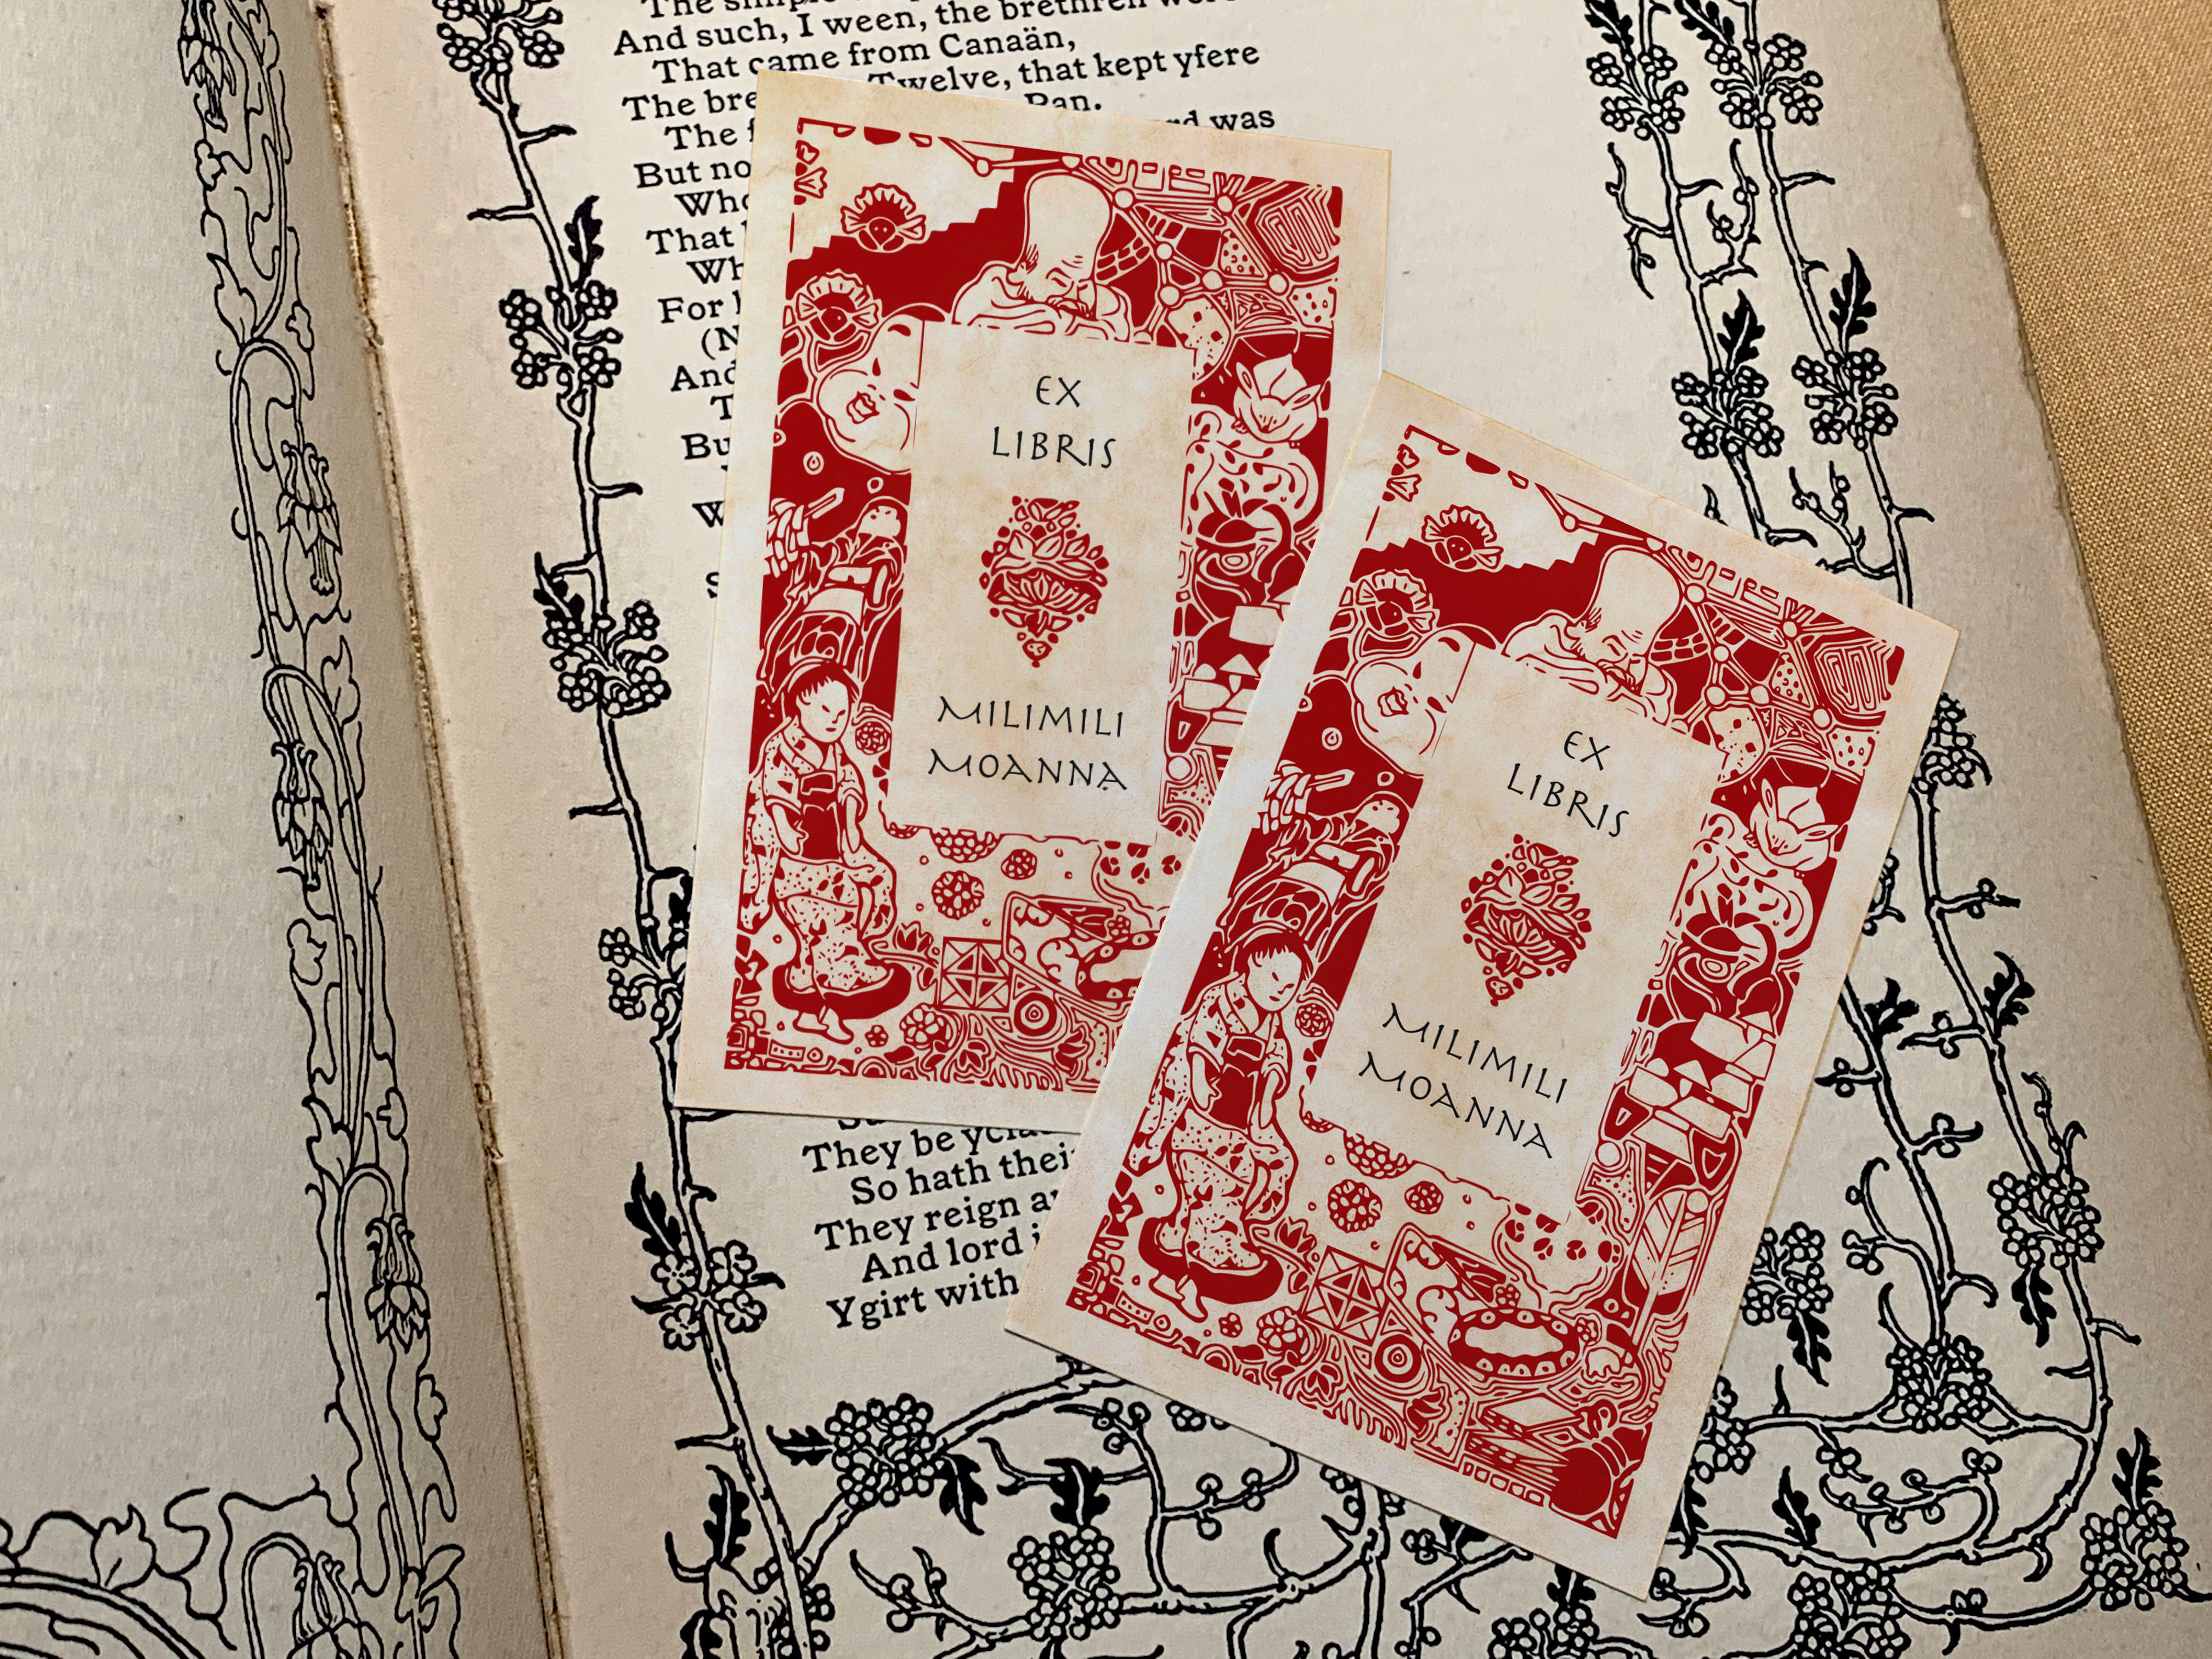 Japanese Toys Woodcut, Personalized Ex-Libris Bookplates, Crafted on Traditional Gummed Paper, 2.5in x 4in, Set of 30